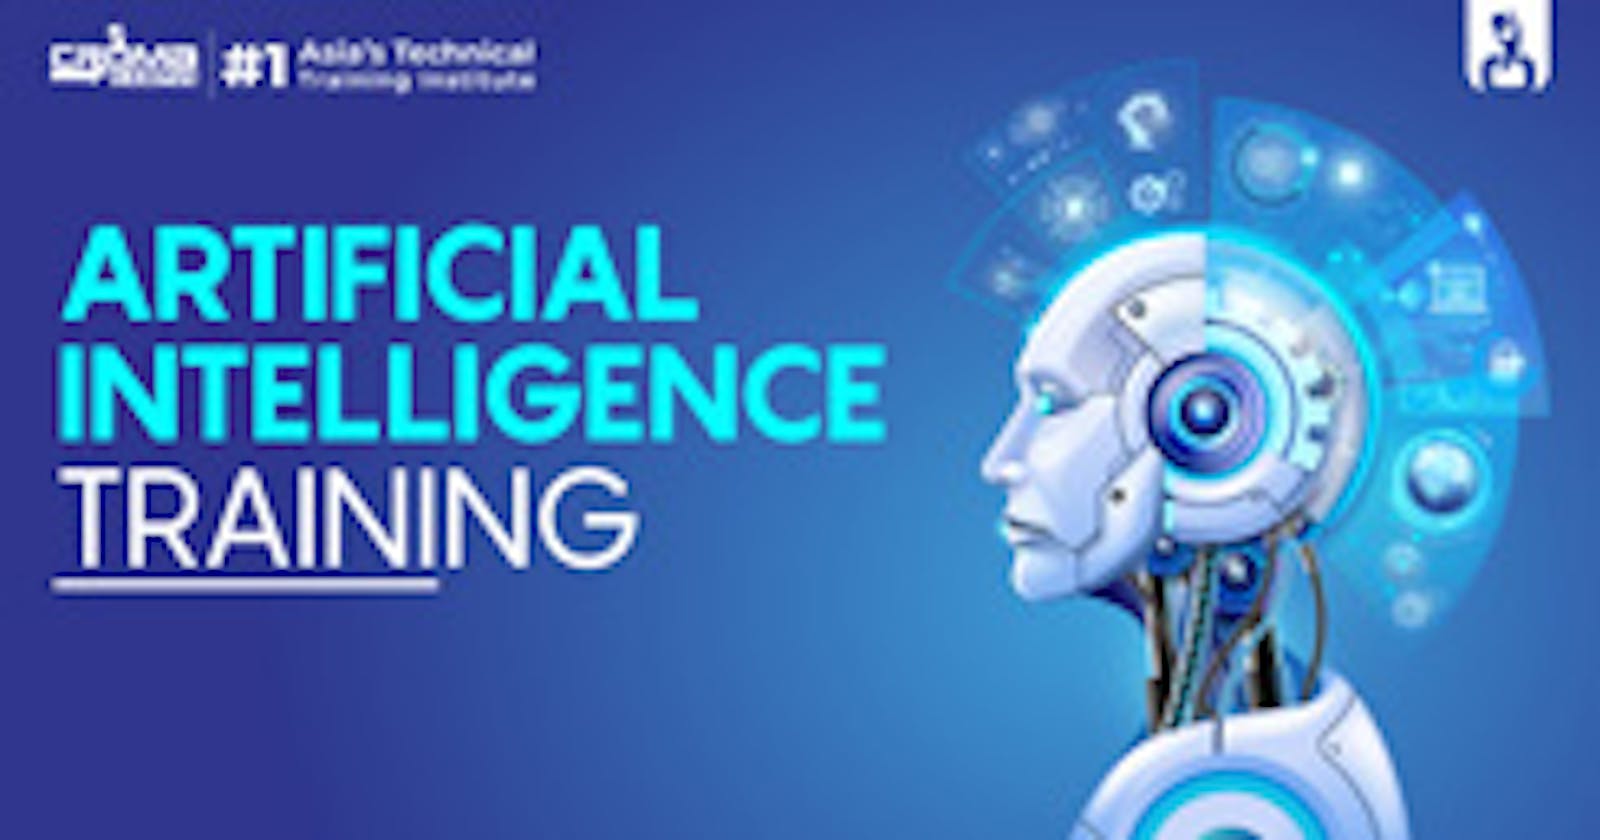 What are the topmost advantages of Artificial Intelligence?